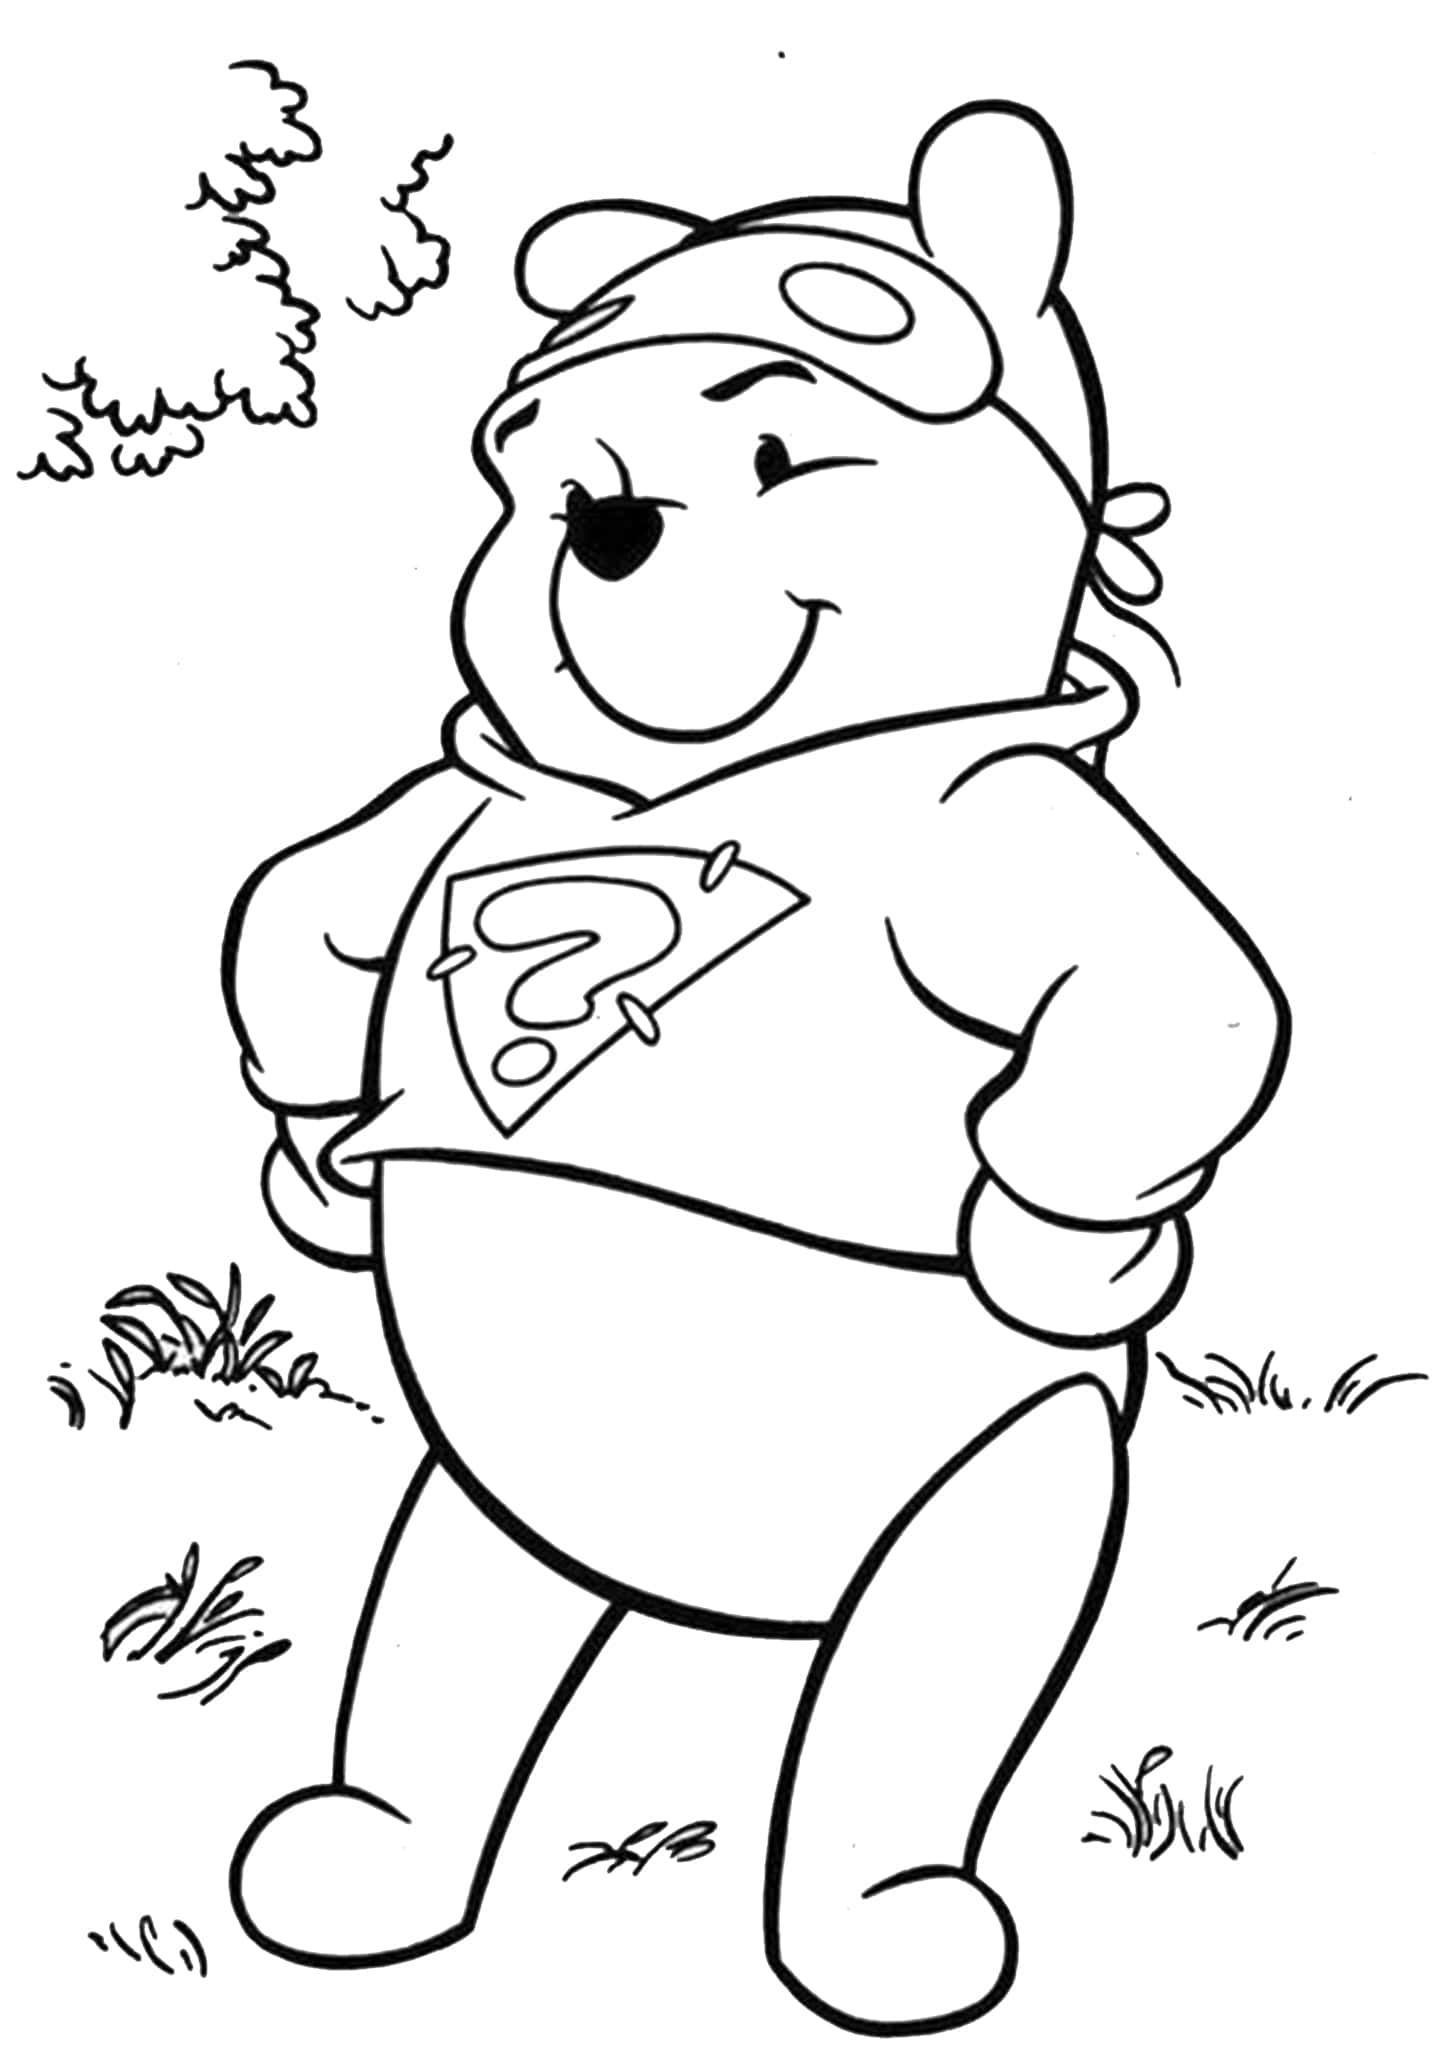 Free easy to print winnie the pooh coloring pages